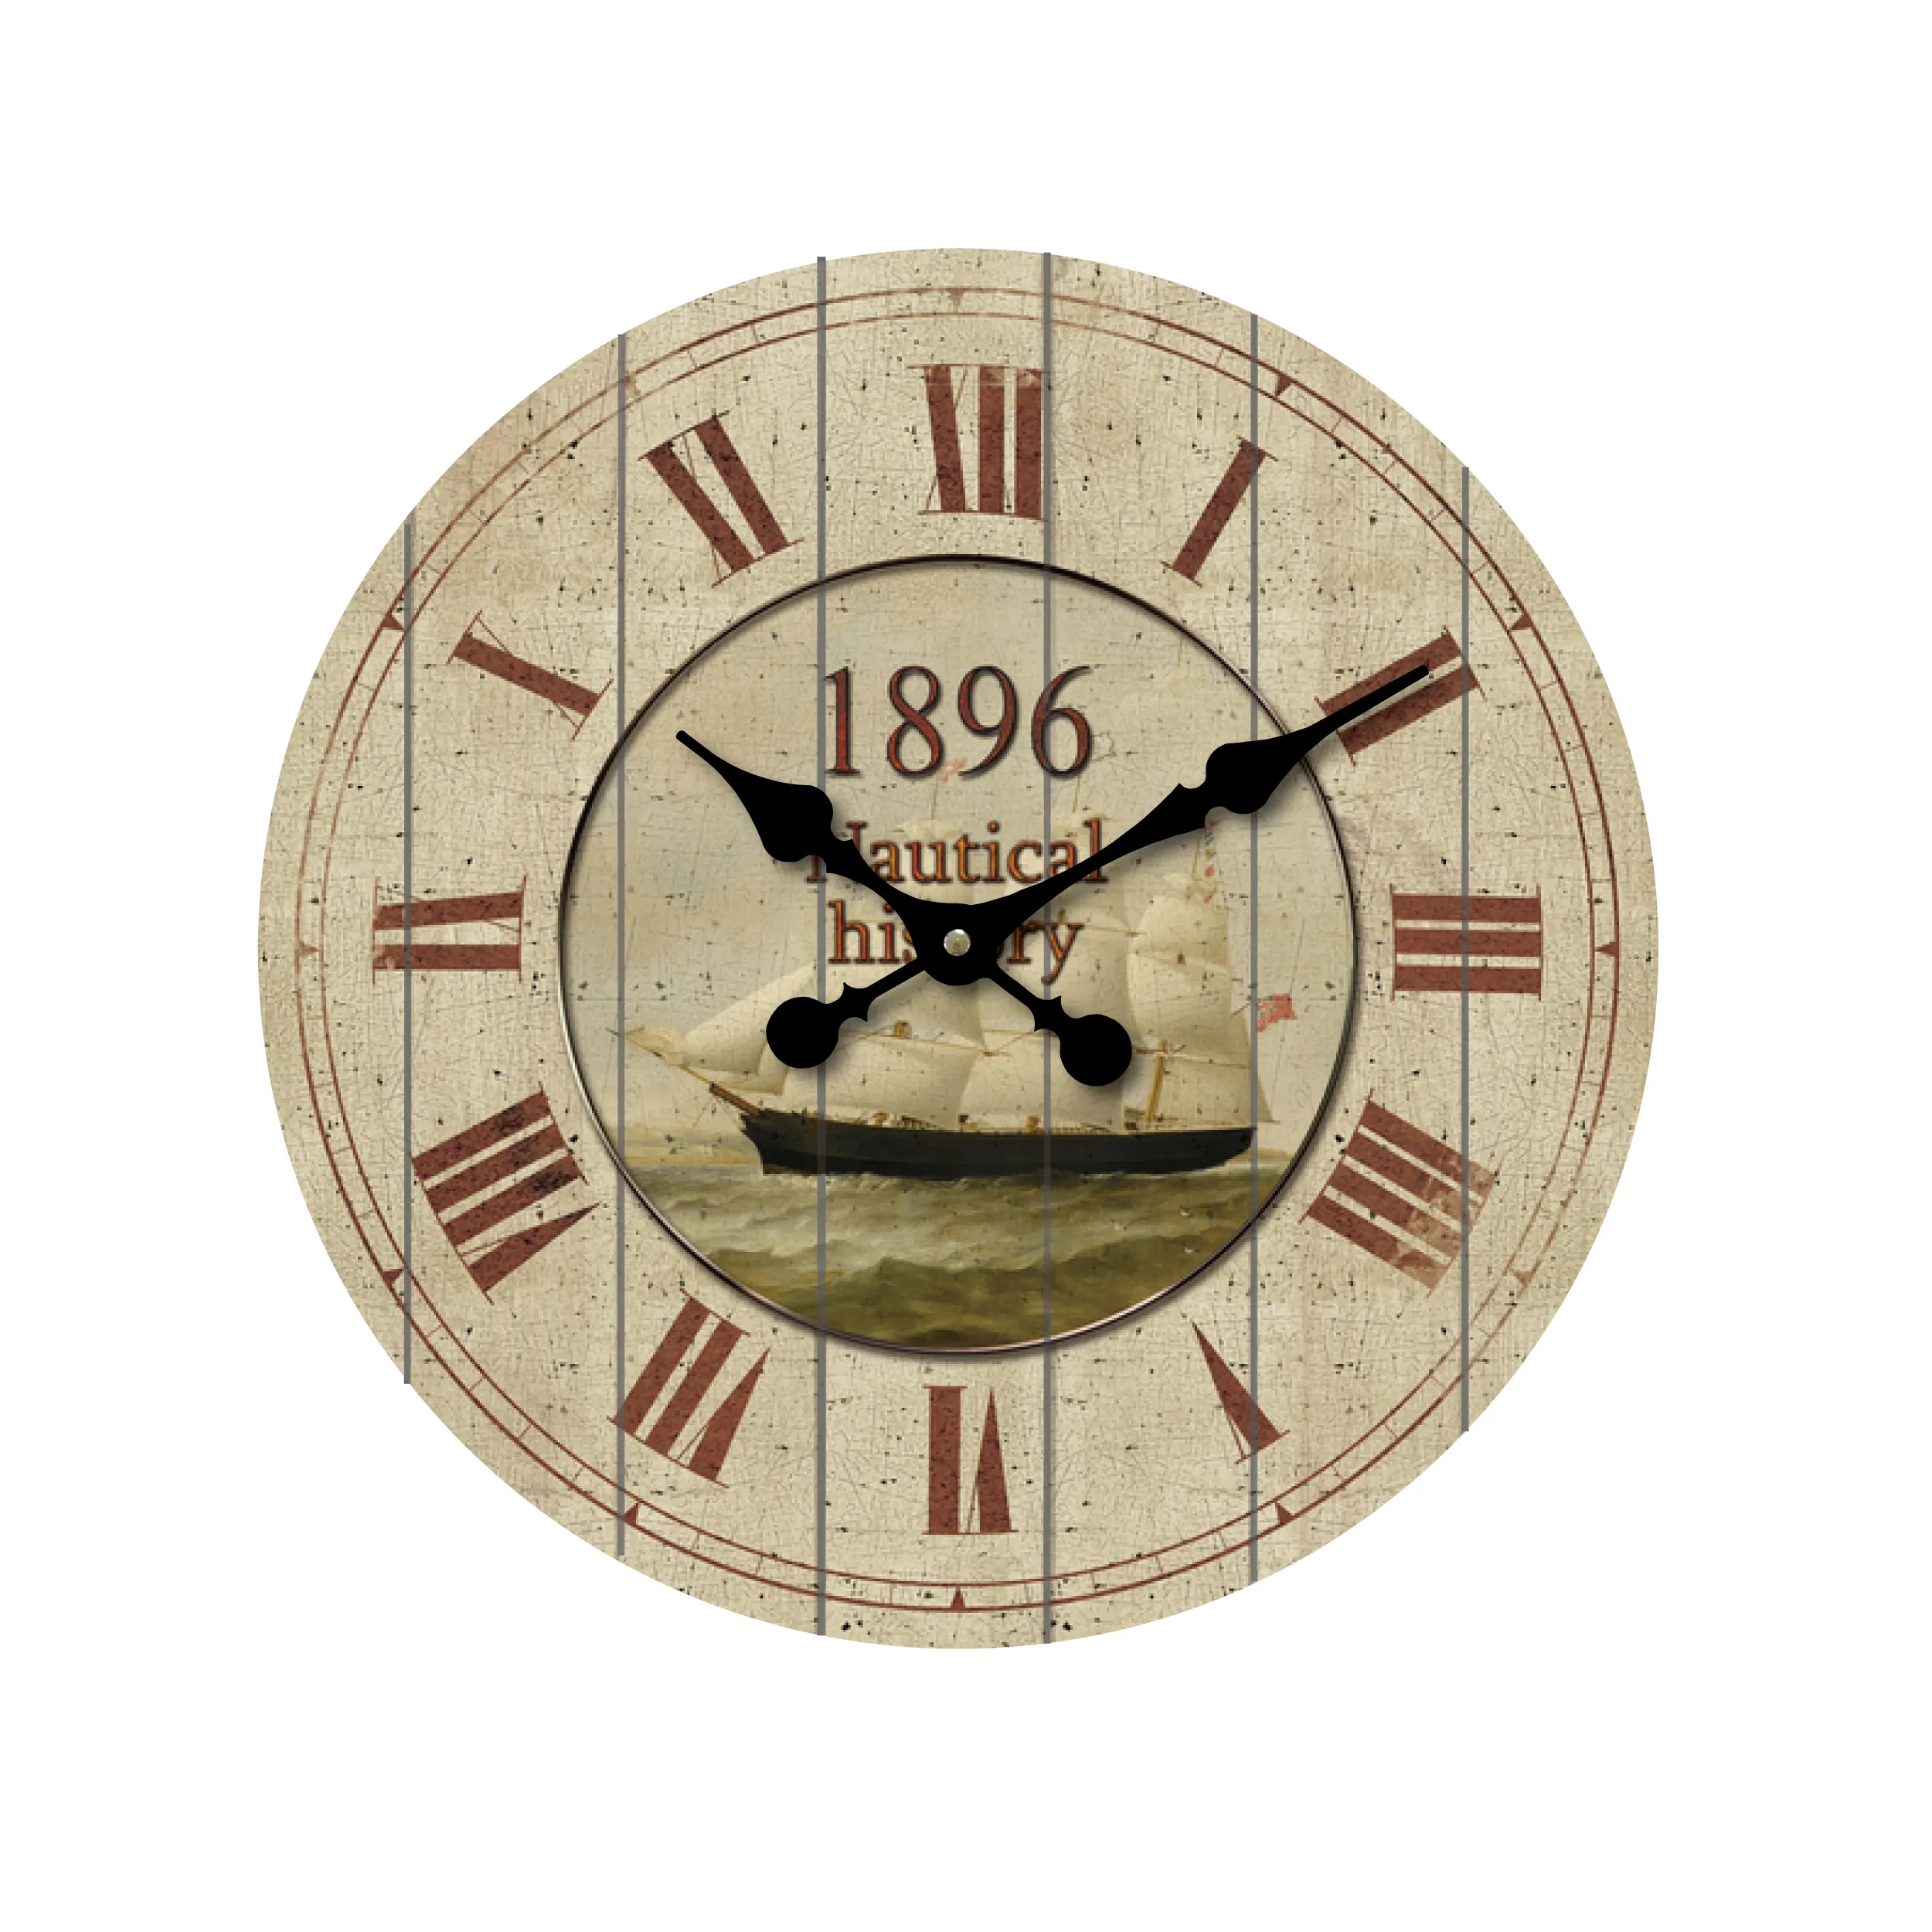 14 inch vintage style home decor round printing wood wall clock with good quality